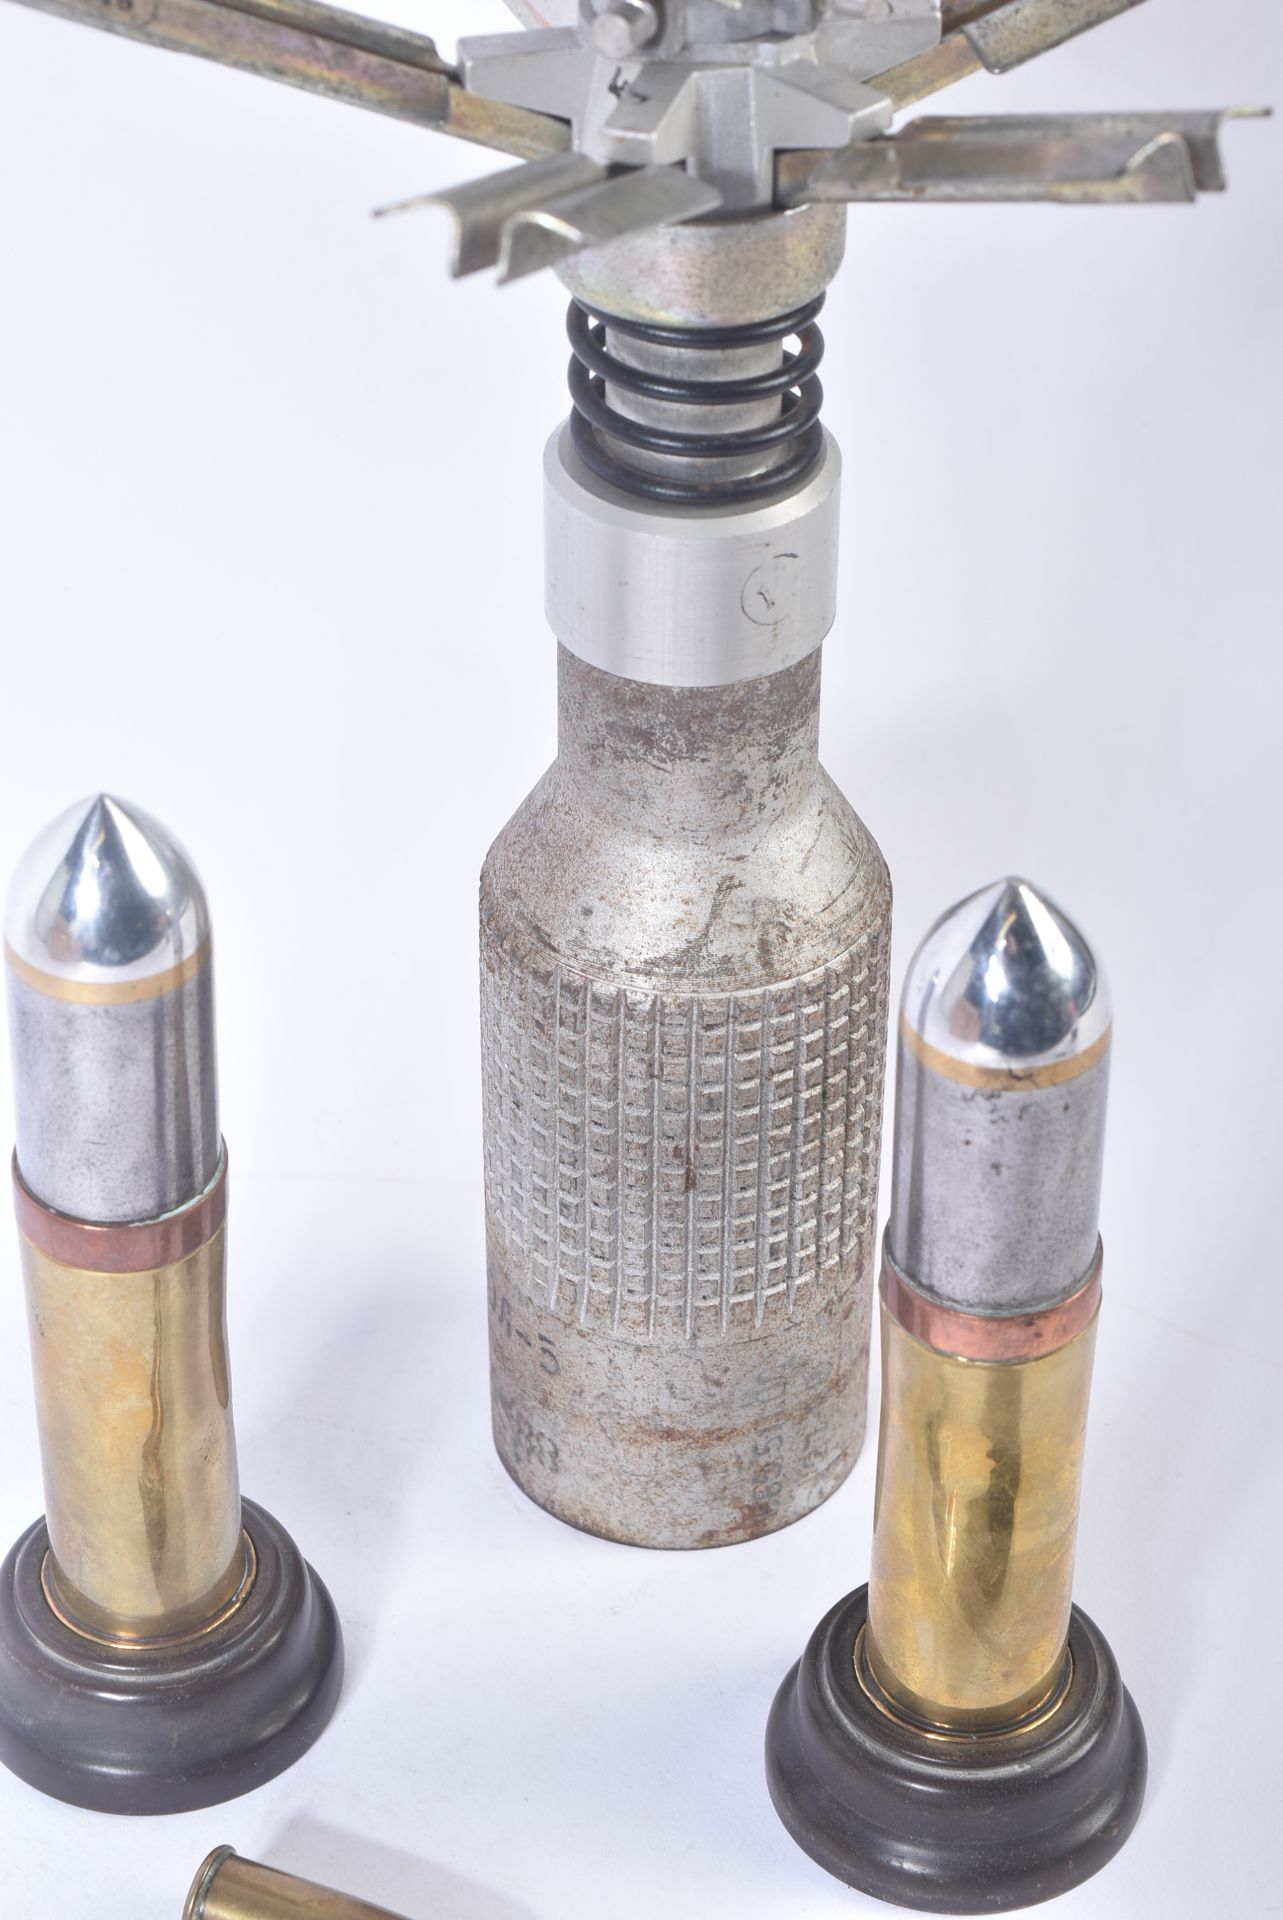 COLD WAR ERA RUSSIAN CLUSTER BUMB AND OTHER TRENCH ART PIECES - Image 4 of 8